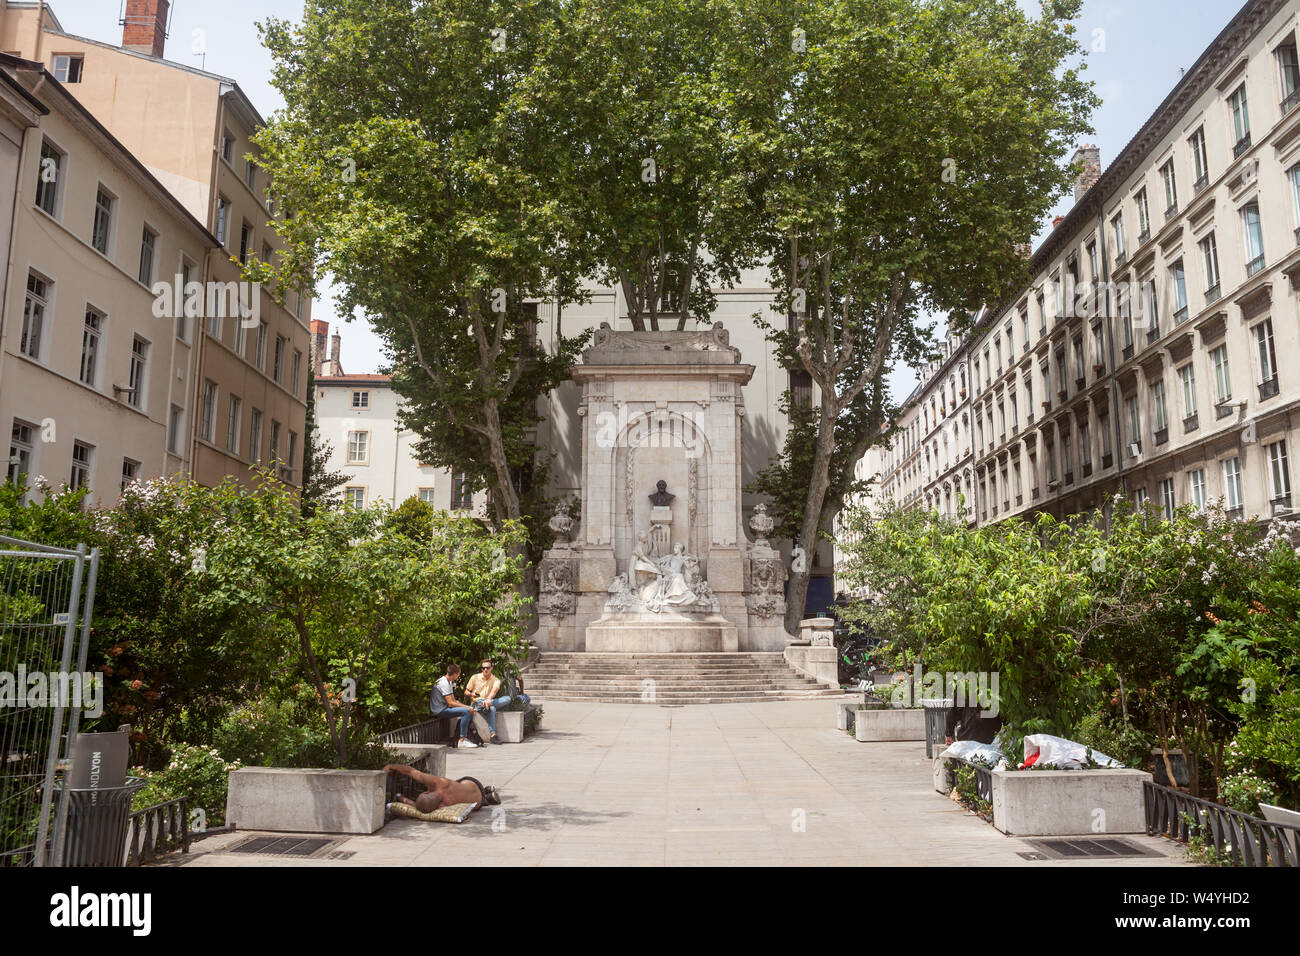 LYON, FRANCE - JULY 18, 2019: Place gailleton square with its monument and fountain in the Old Lyon (Vieux Lyon), on the Presqu'ile district. gailleto Stock Photo